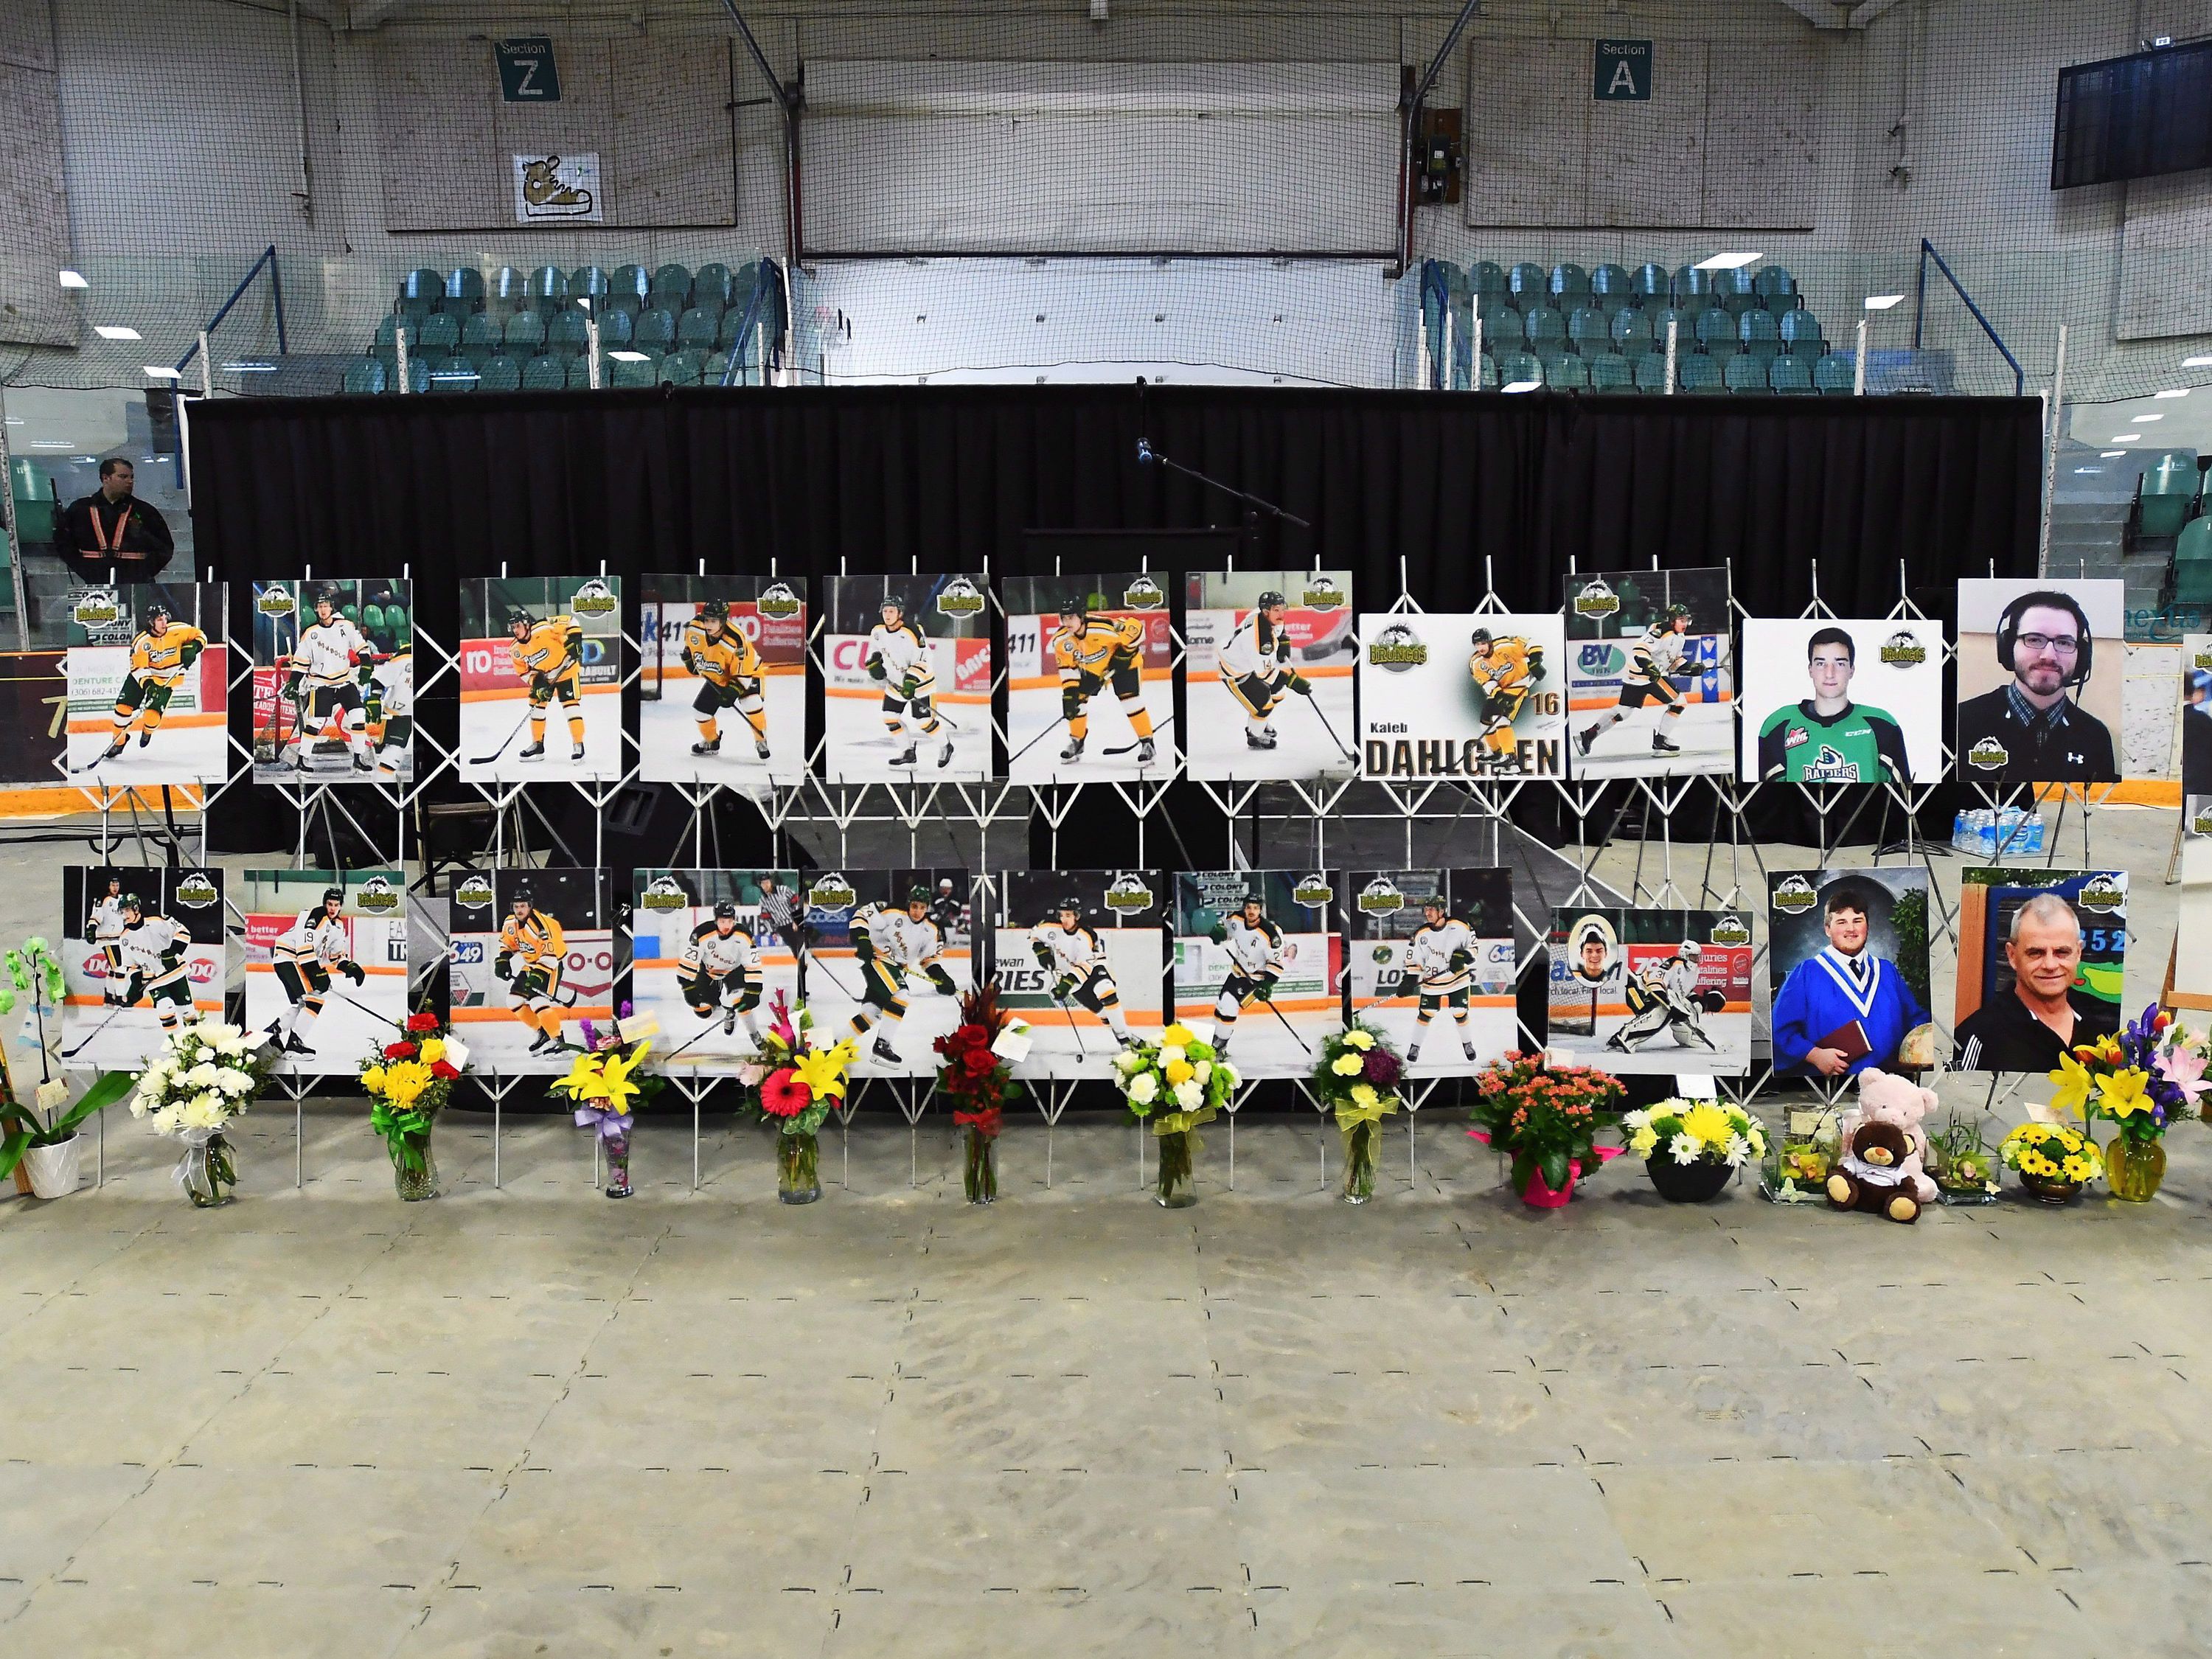 Hockey Source Sports Excellence - Today, on the 3rd anniversary of their  tragic accident, we remember the 16 Humboldt Broncos who lost their lives,  and stand united with their families, teammates, and